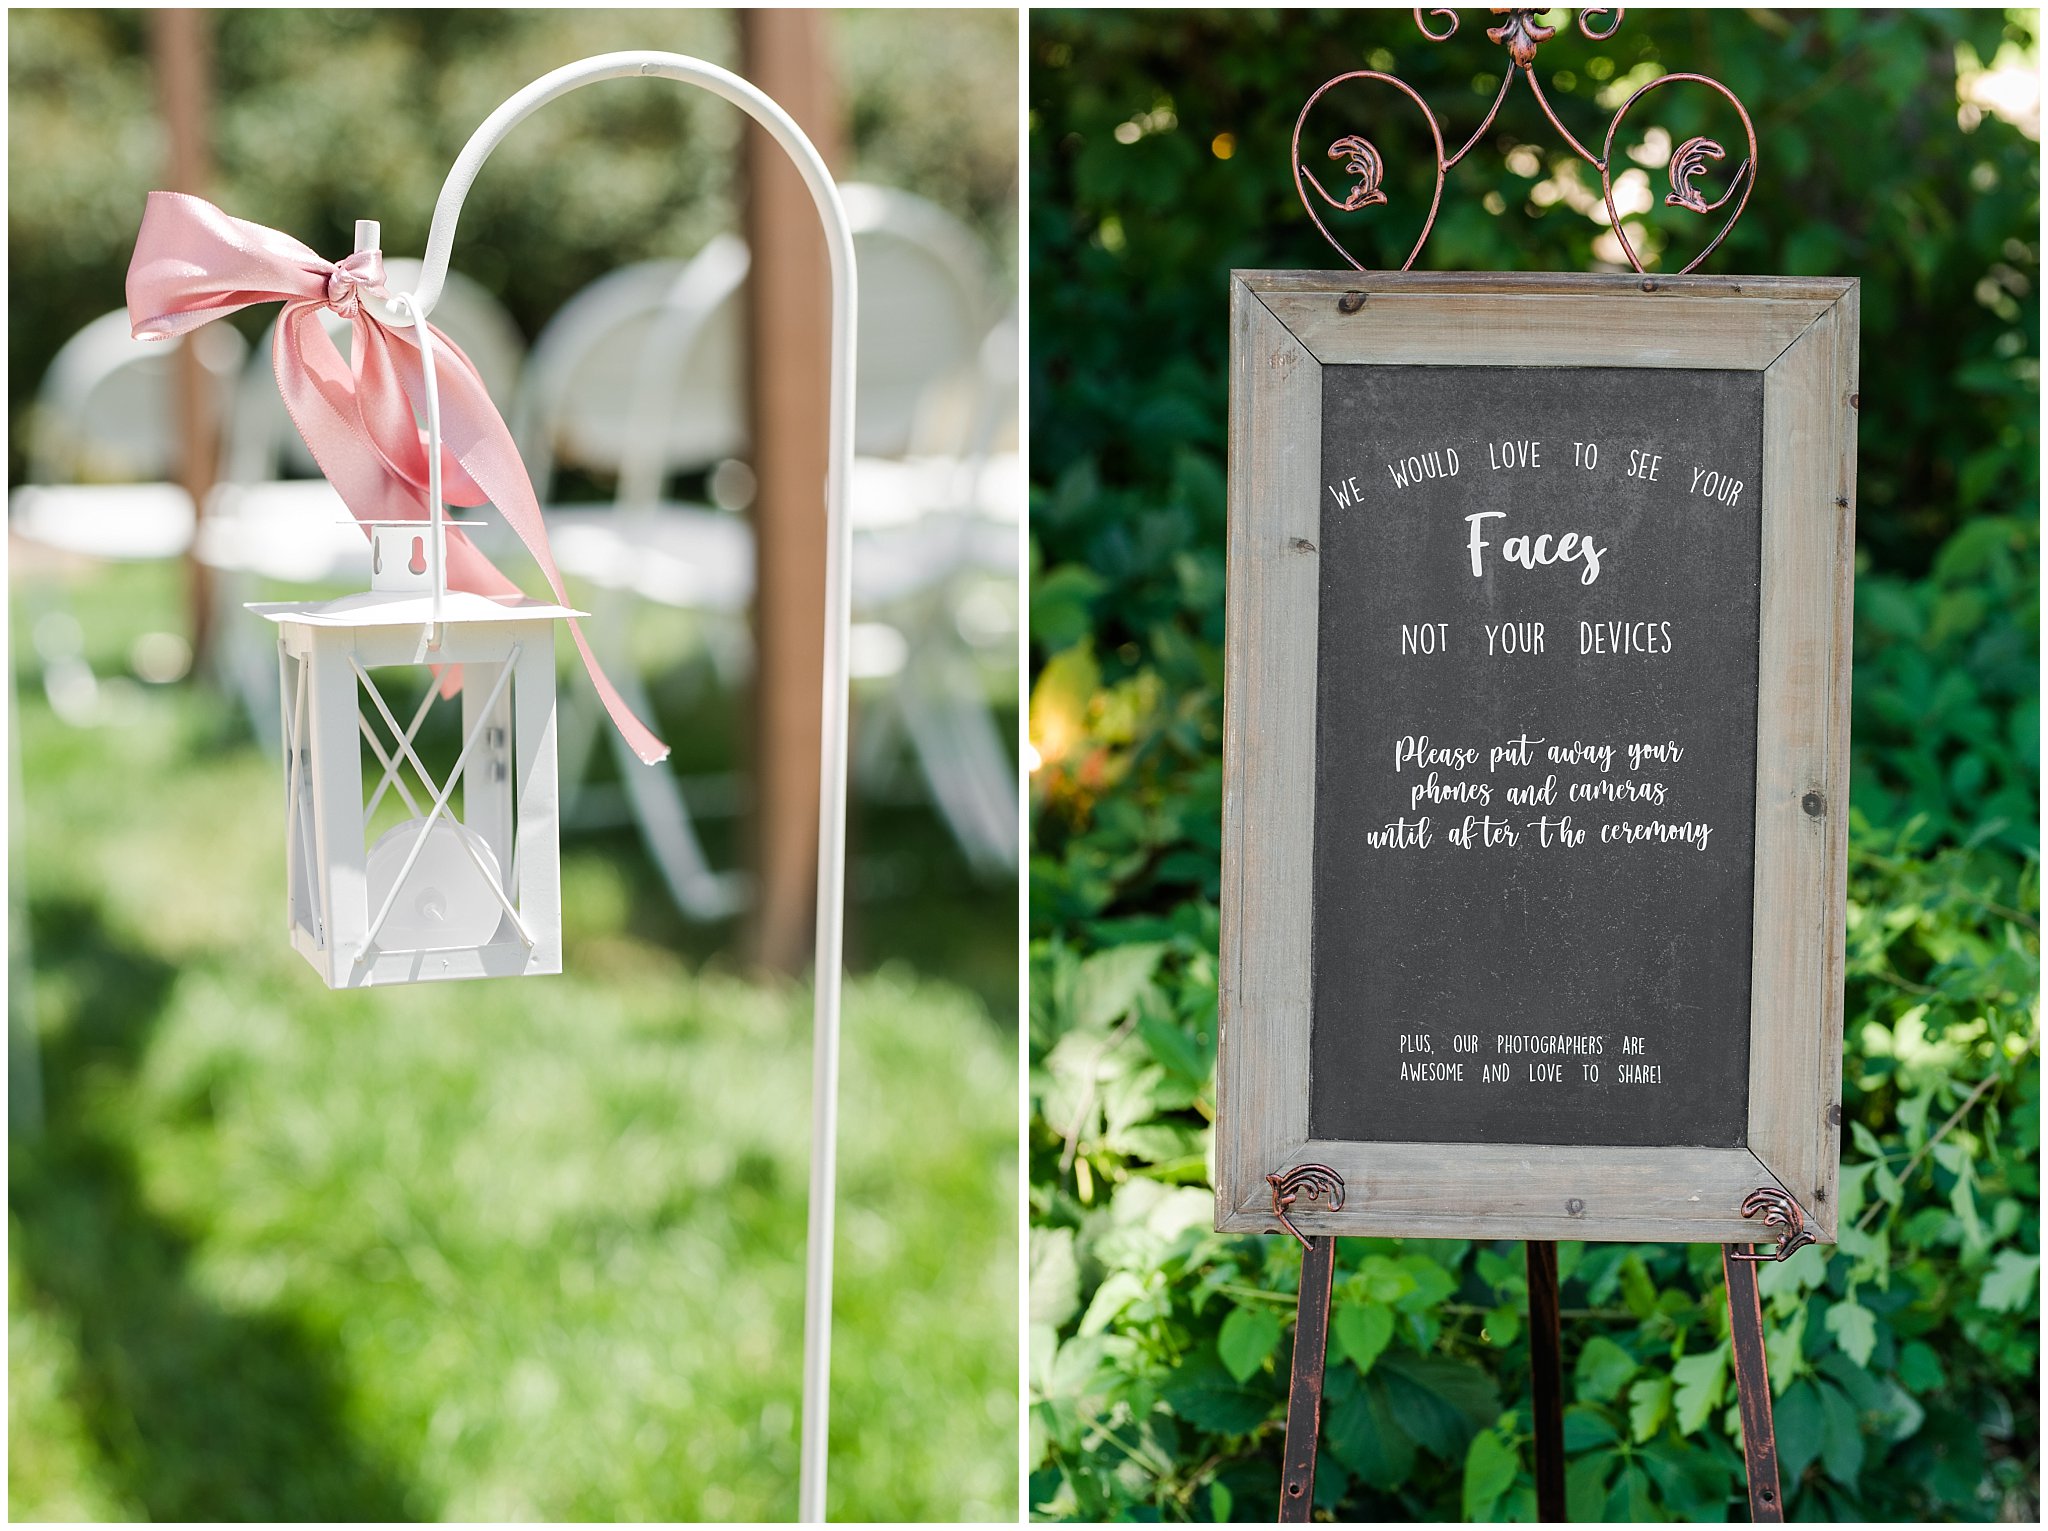 Ceremony site details and unplugged wedding sign | Oak Hills Utah Dusty Rose and Gray Summer Wedding | Jessie and Dallin Photography